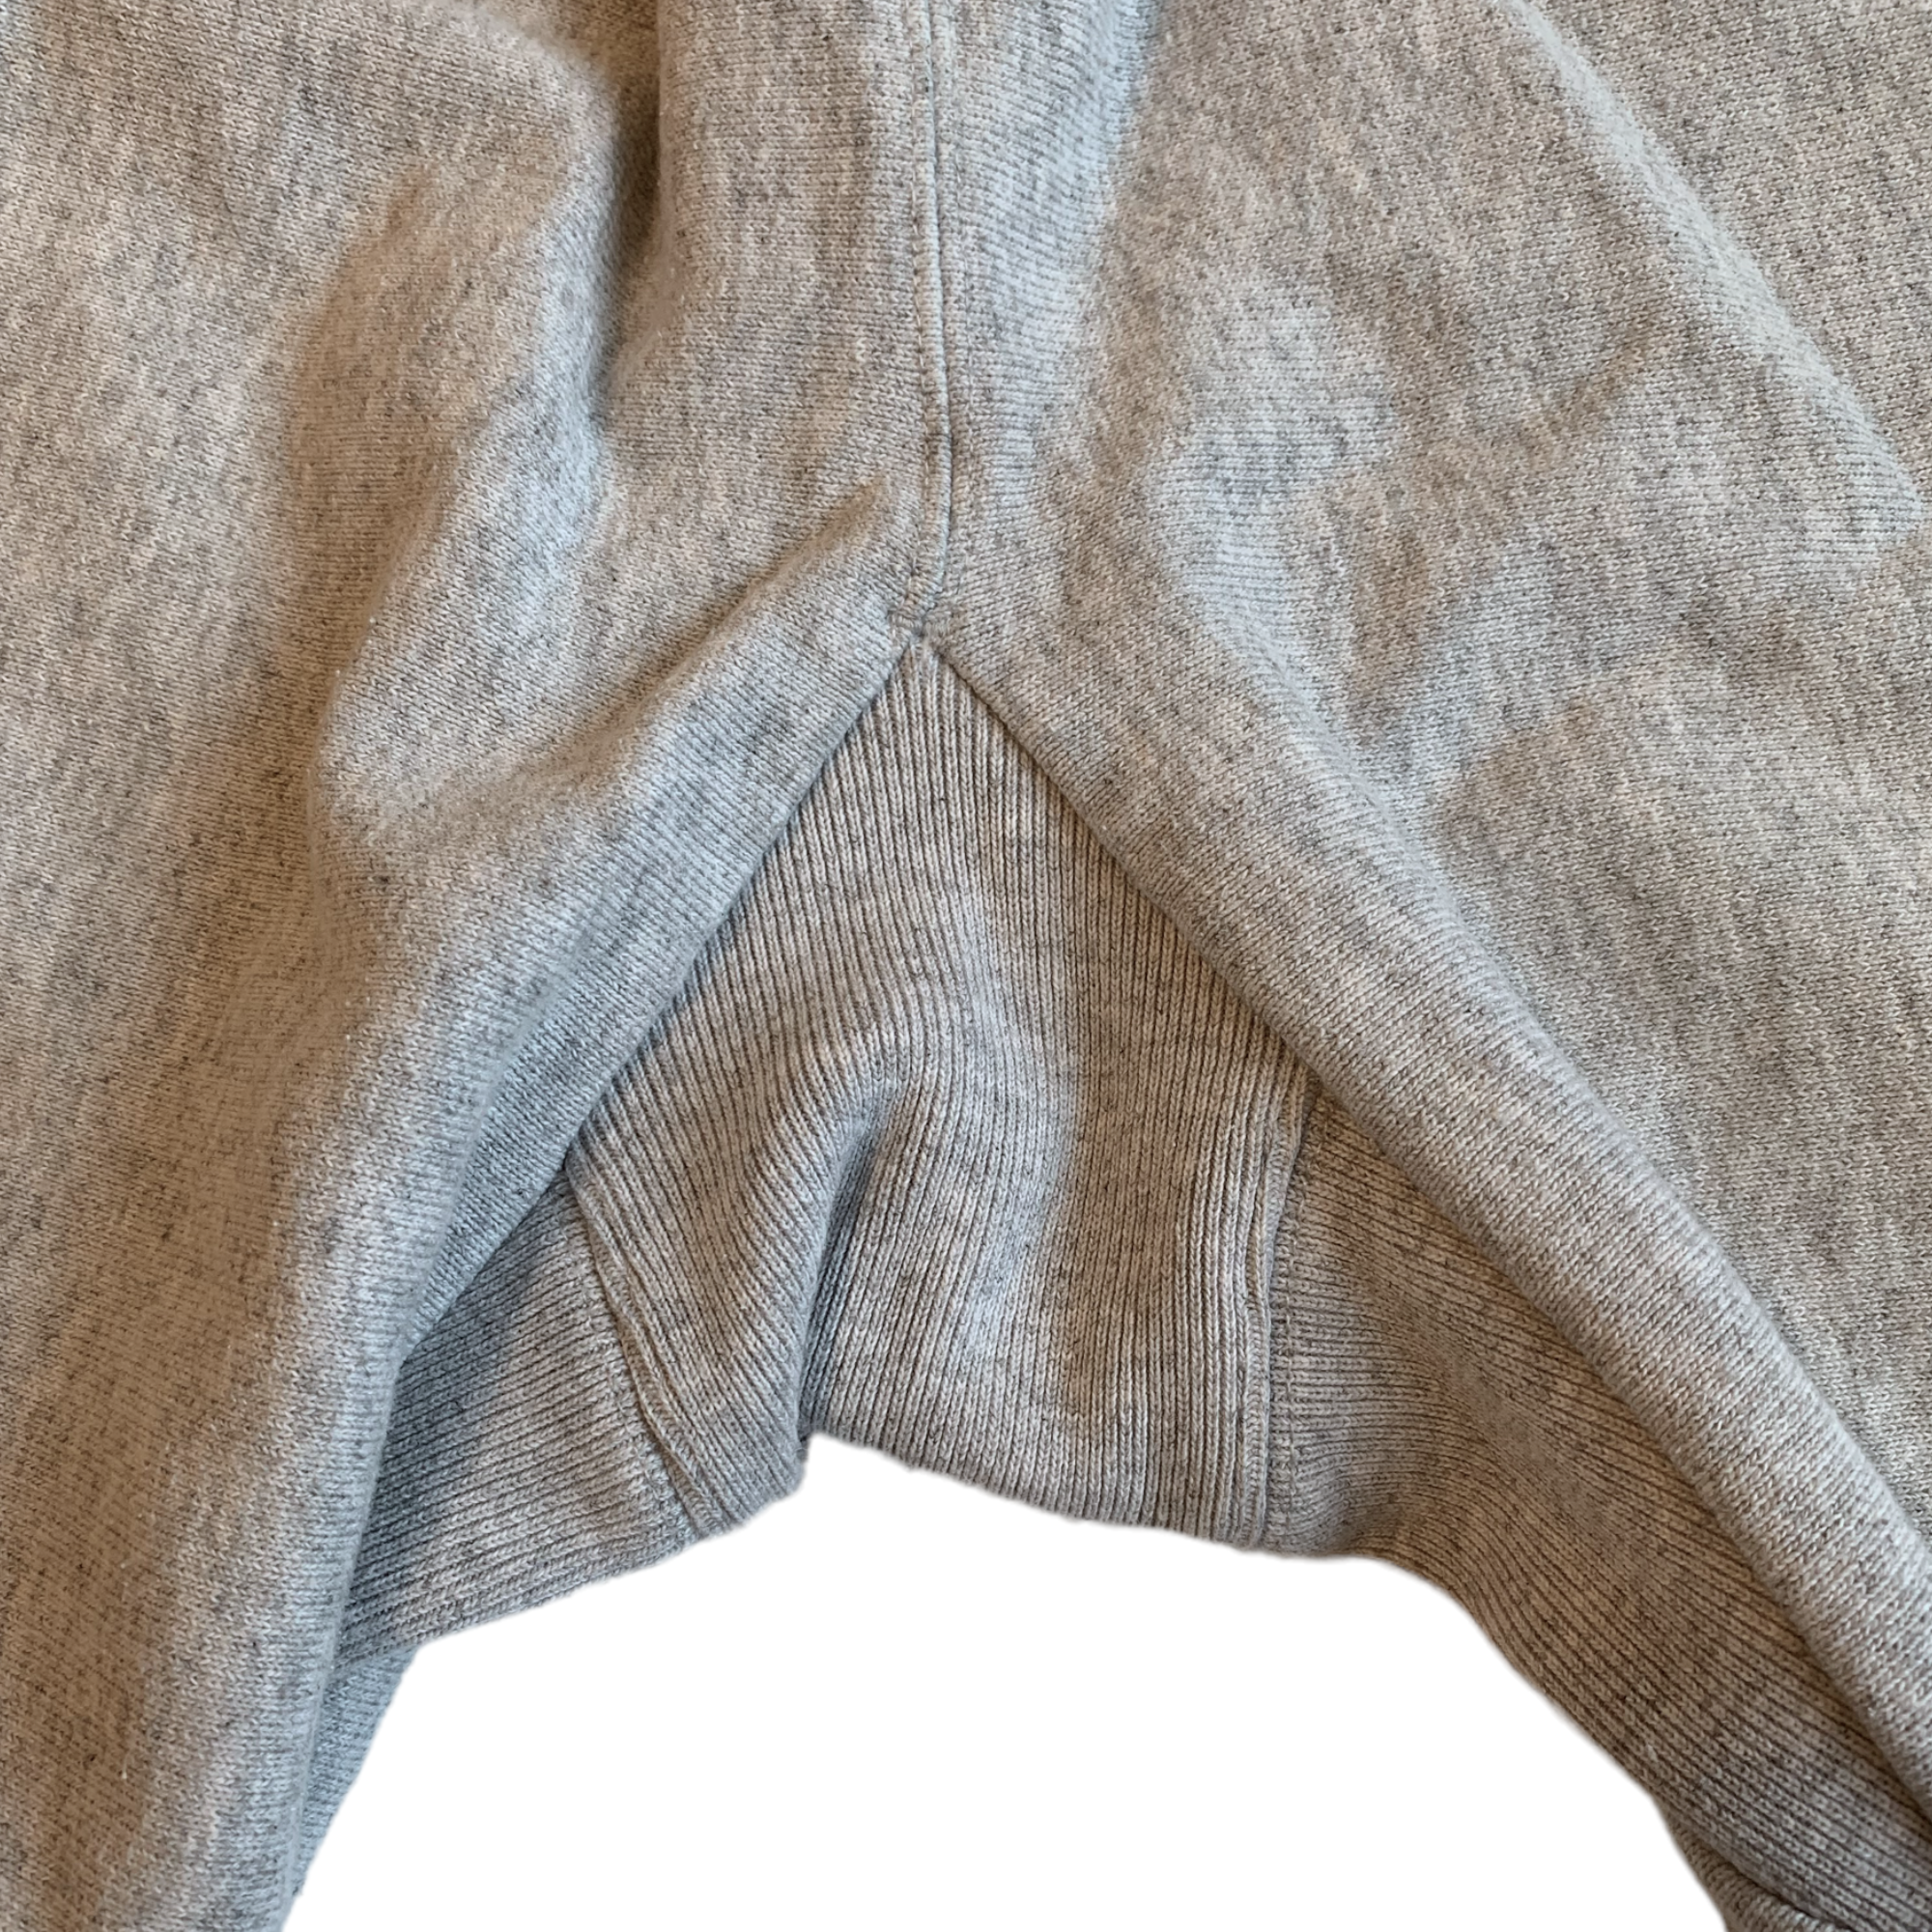 Early 80s Cut-off Champion Reverse Weave Shorts - Heather Grey - S